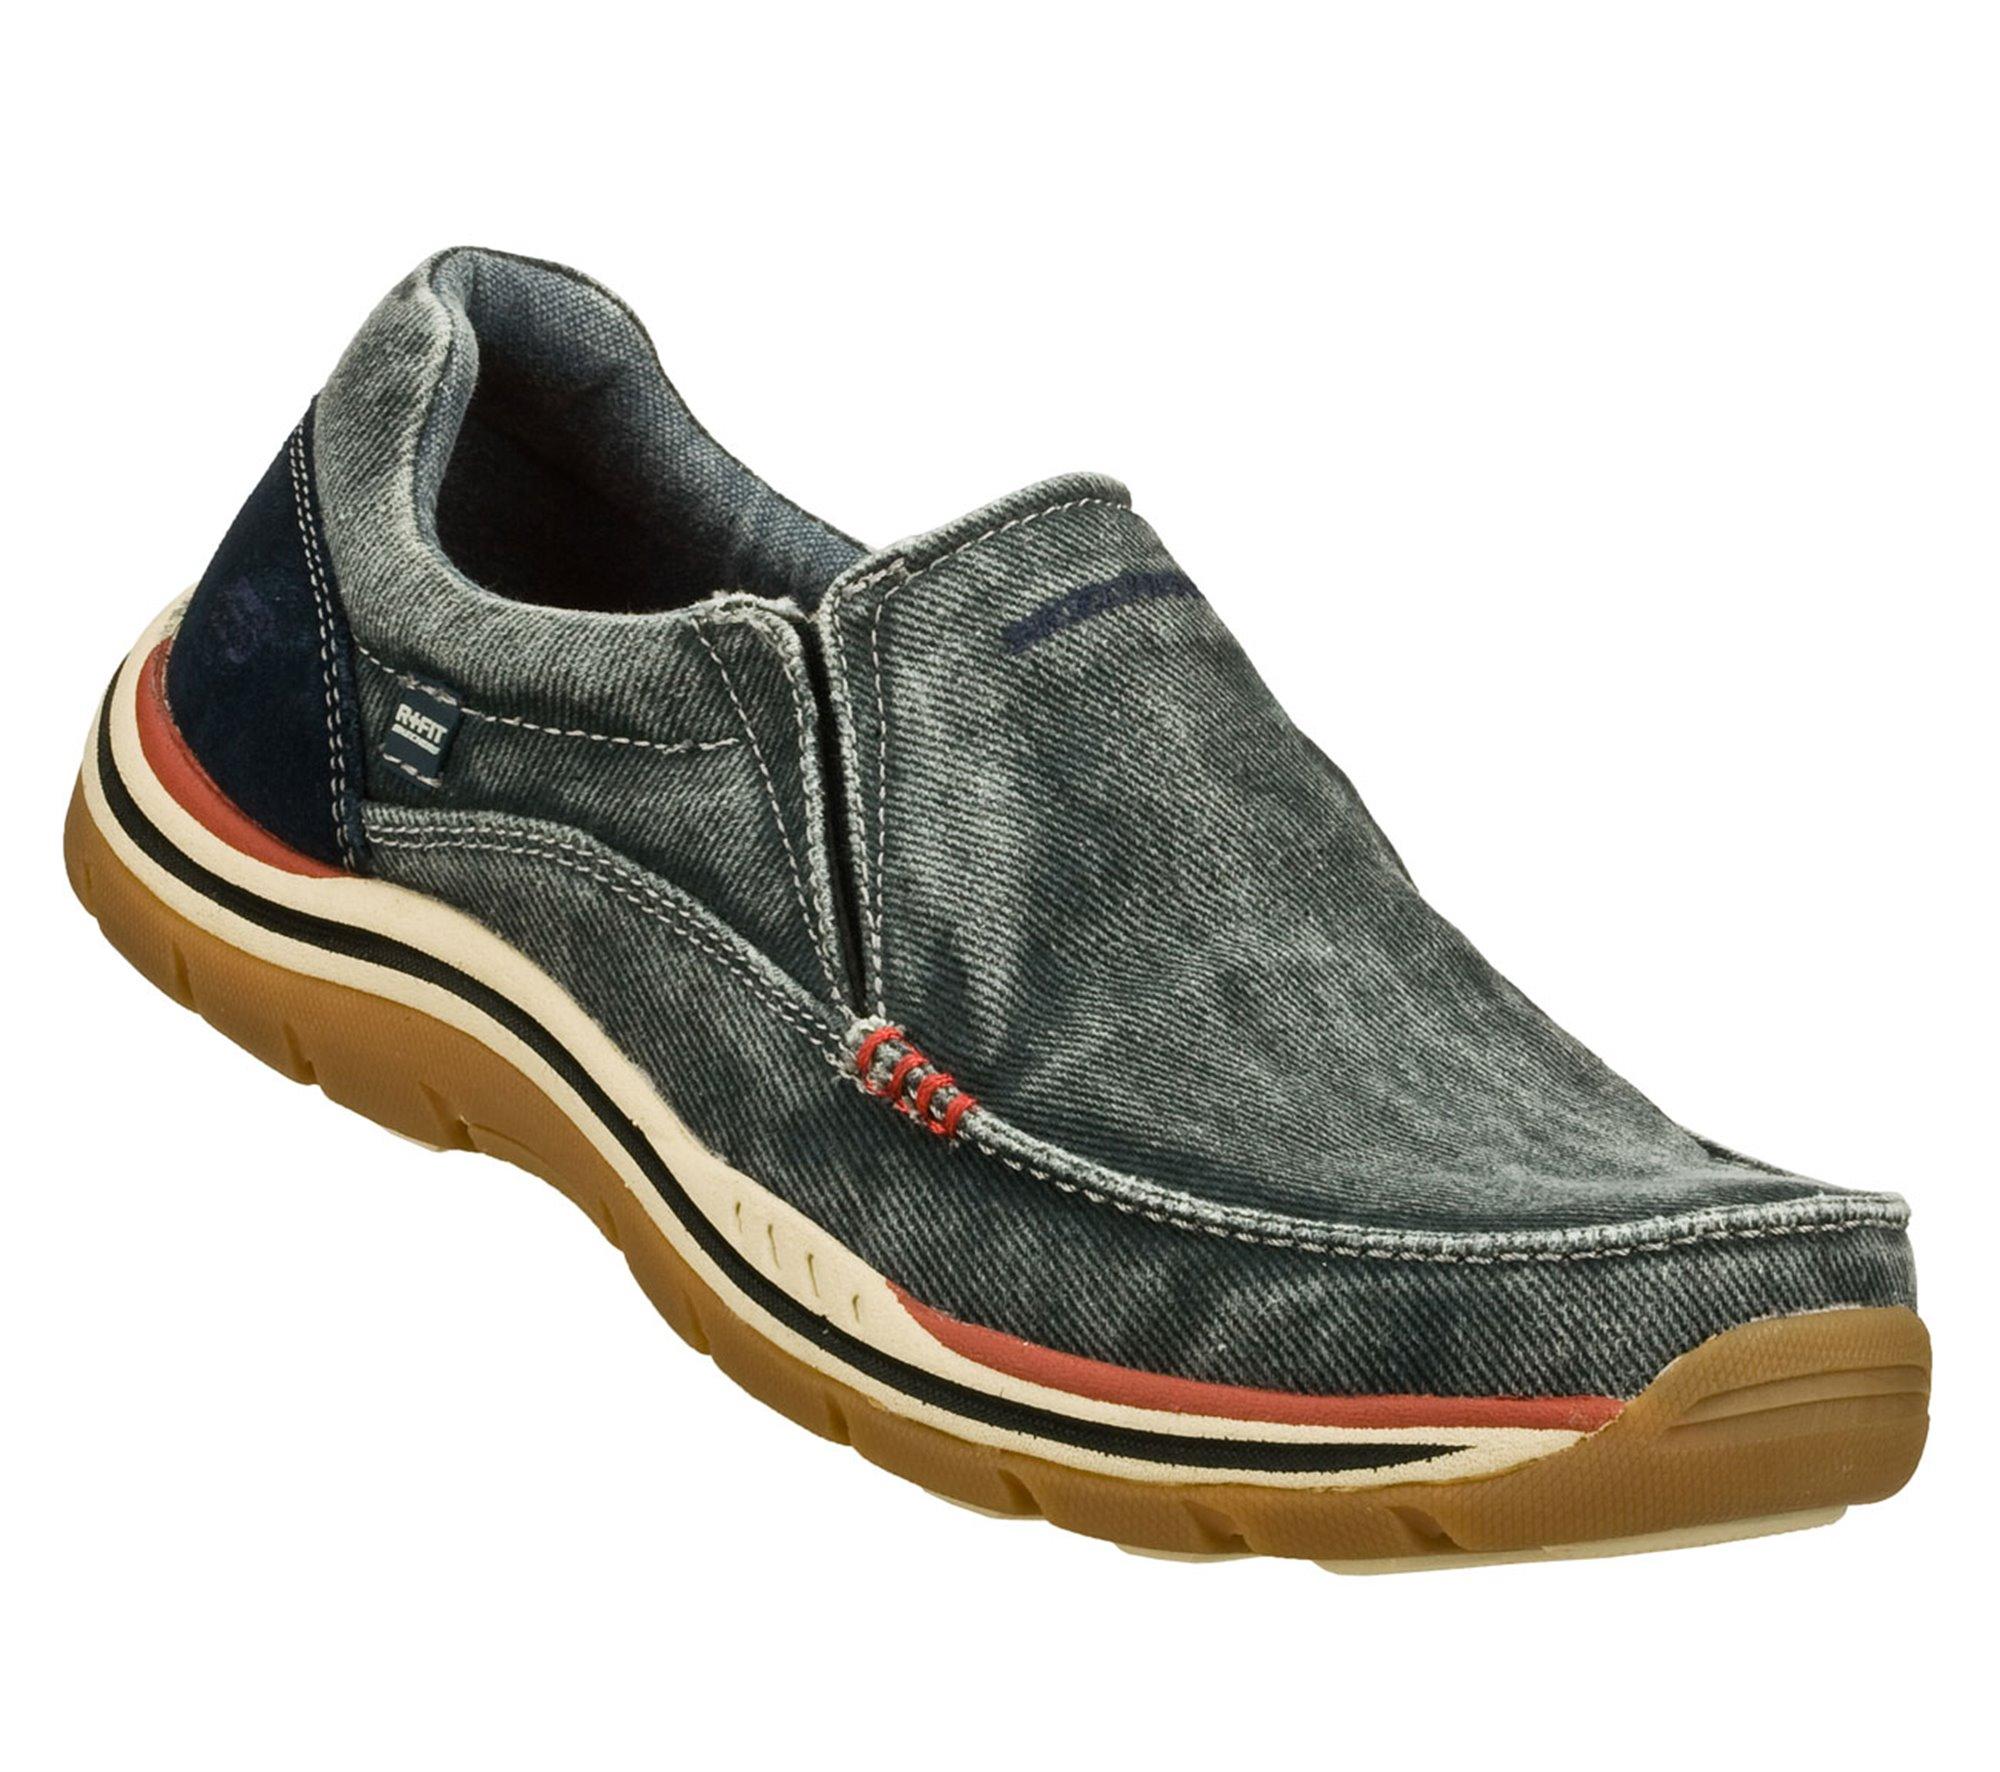 Skechers Canvas Relaxed Fit: Expected - Avillo - Final Sale in Navy ...